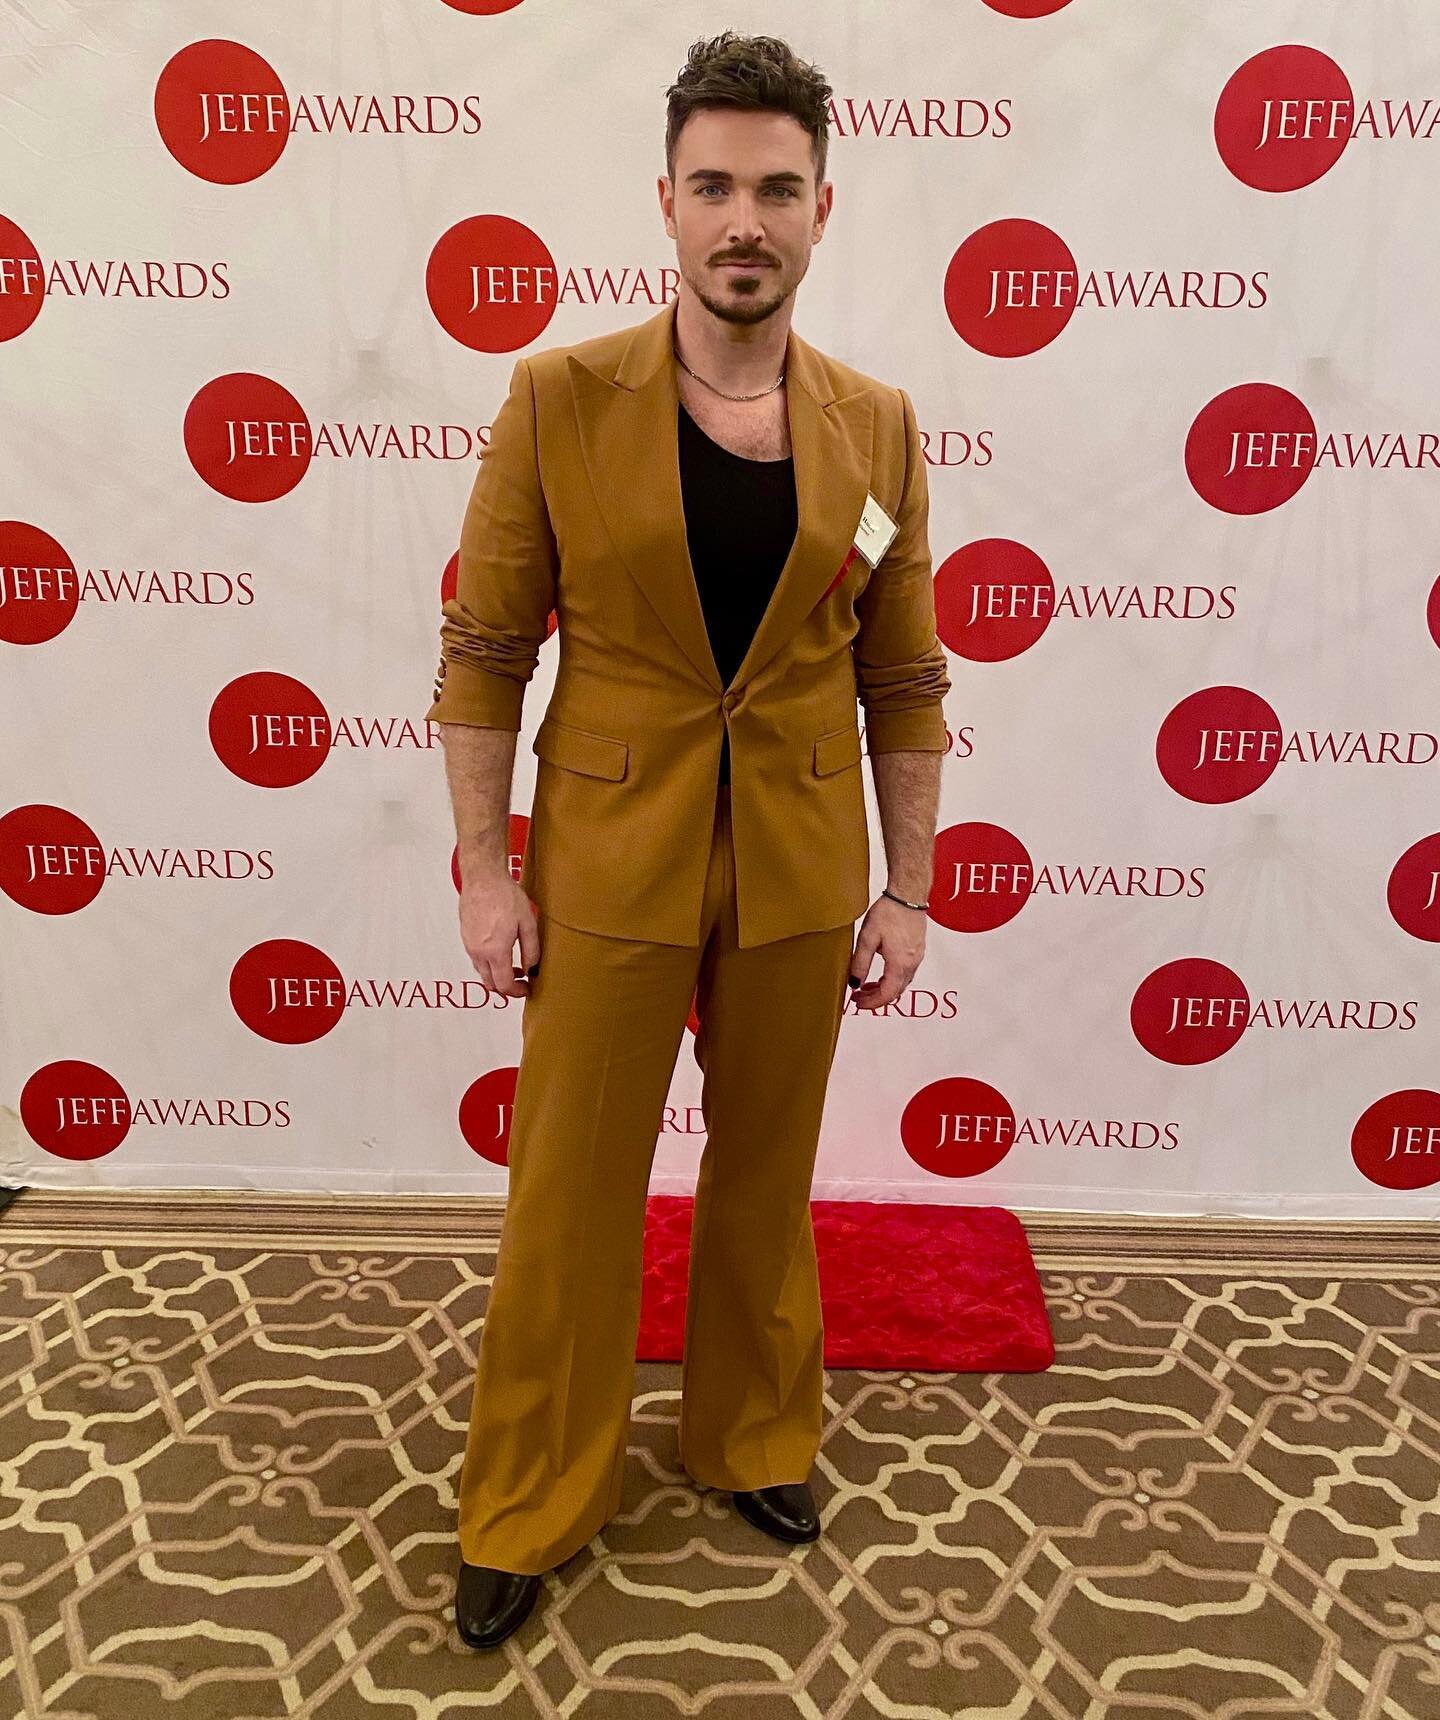 Celebrating Damn Yankees and so many friends at @thejeffawards last night. Such an honor being in the room with so many incredible artists. @marriotttheatre #damnyankees #chicago #choreographer 

Styled by @jakesokoloff